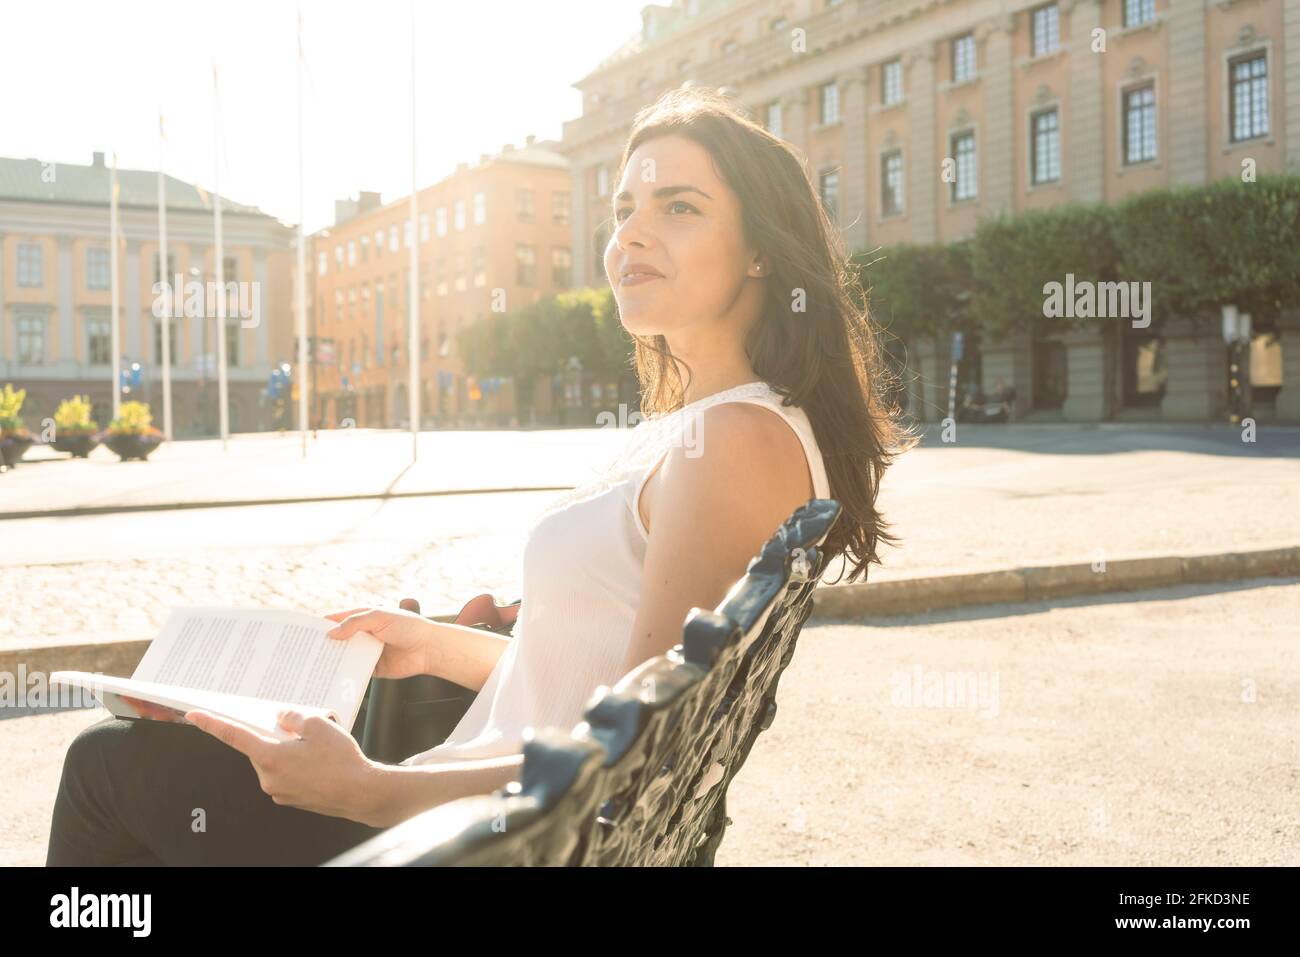 Sweden, Stockholms Lan, Stockholm, Young woman sitting on bench and holding book Stock Photo